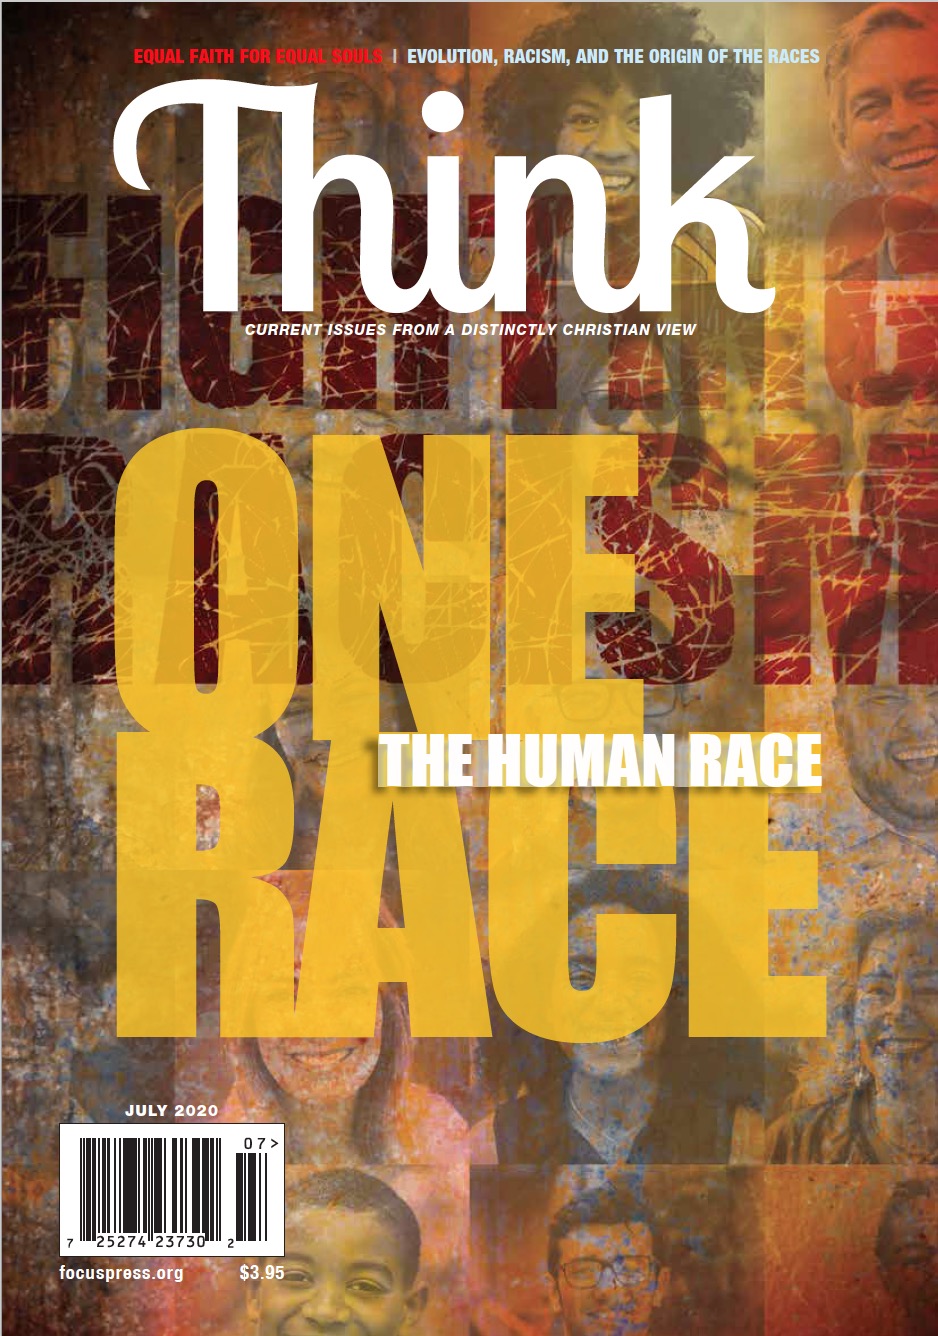 Think Magazine on Race issues